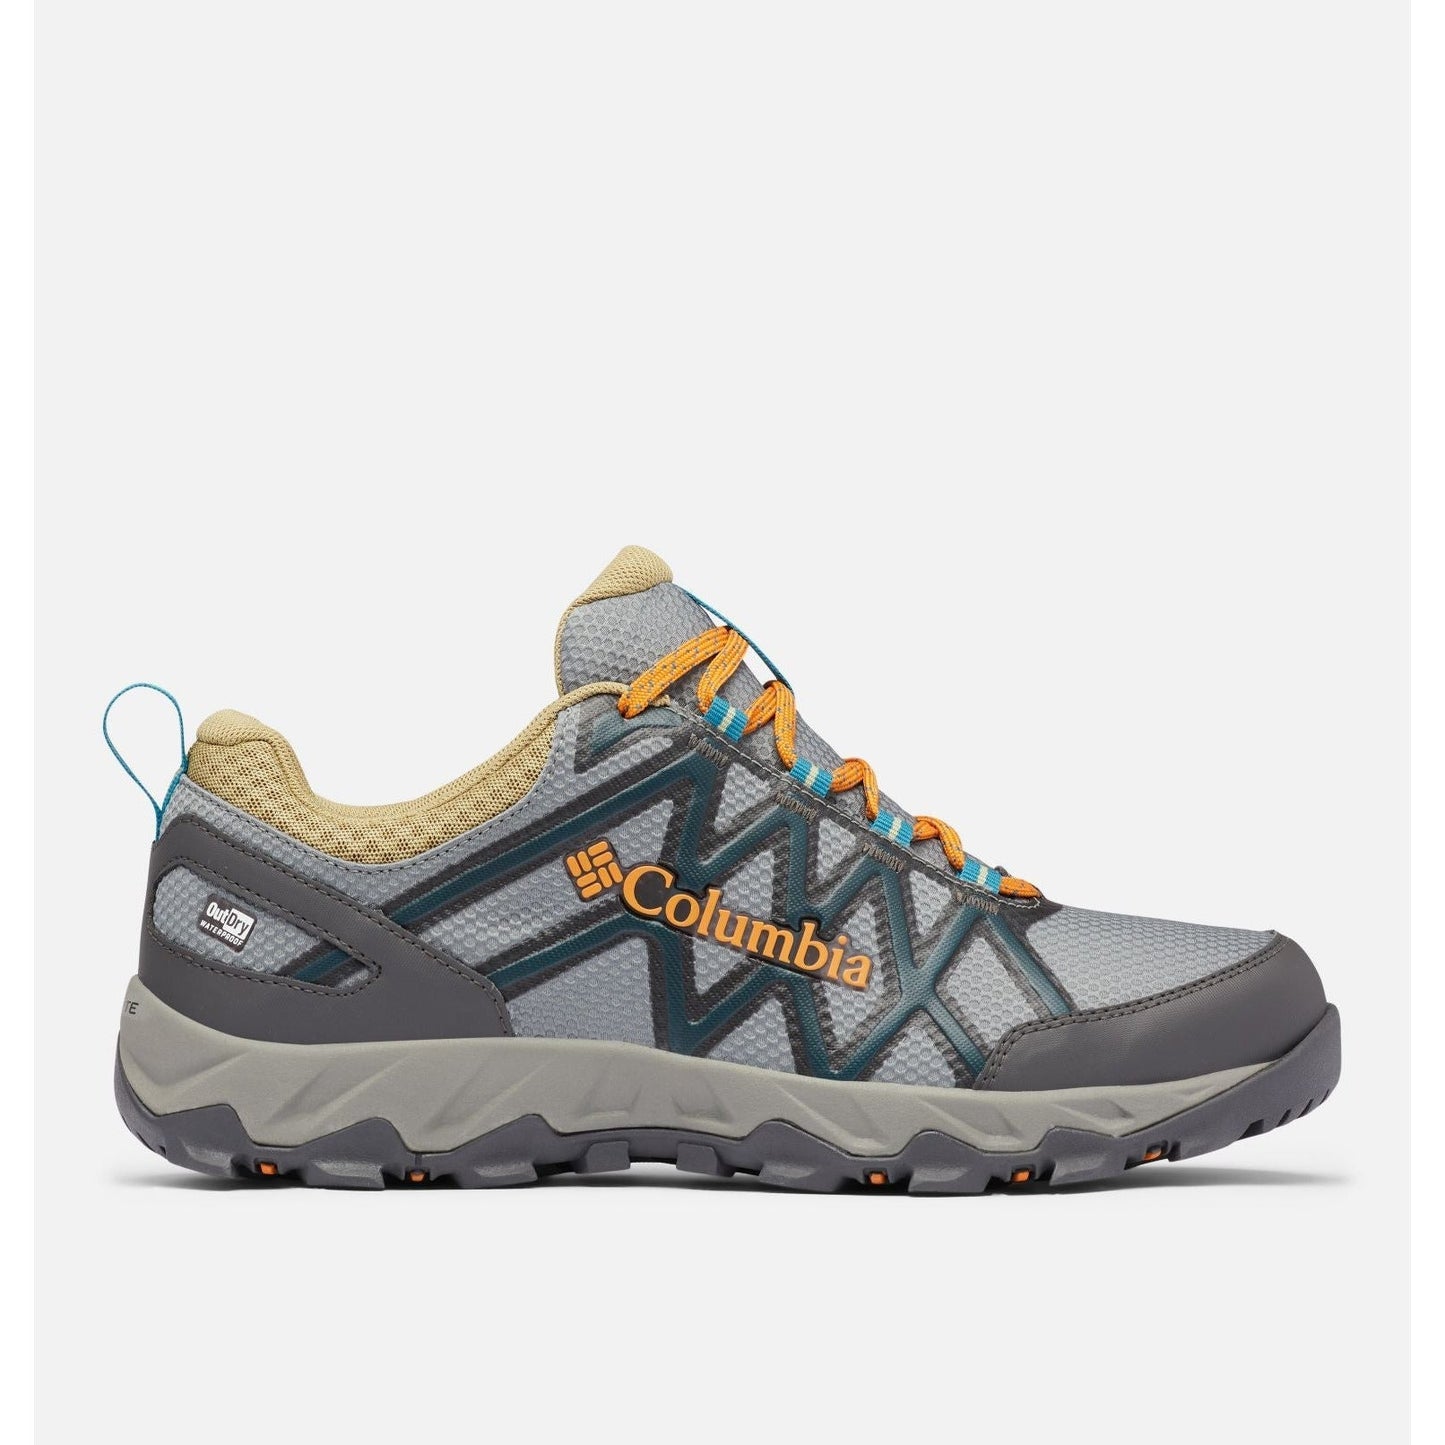 CHAUSSURE COLUMBIA PEAKFREAK X2 OUTDRY WIDE